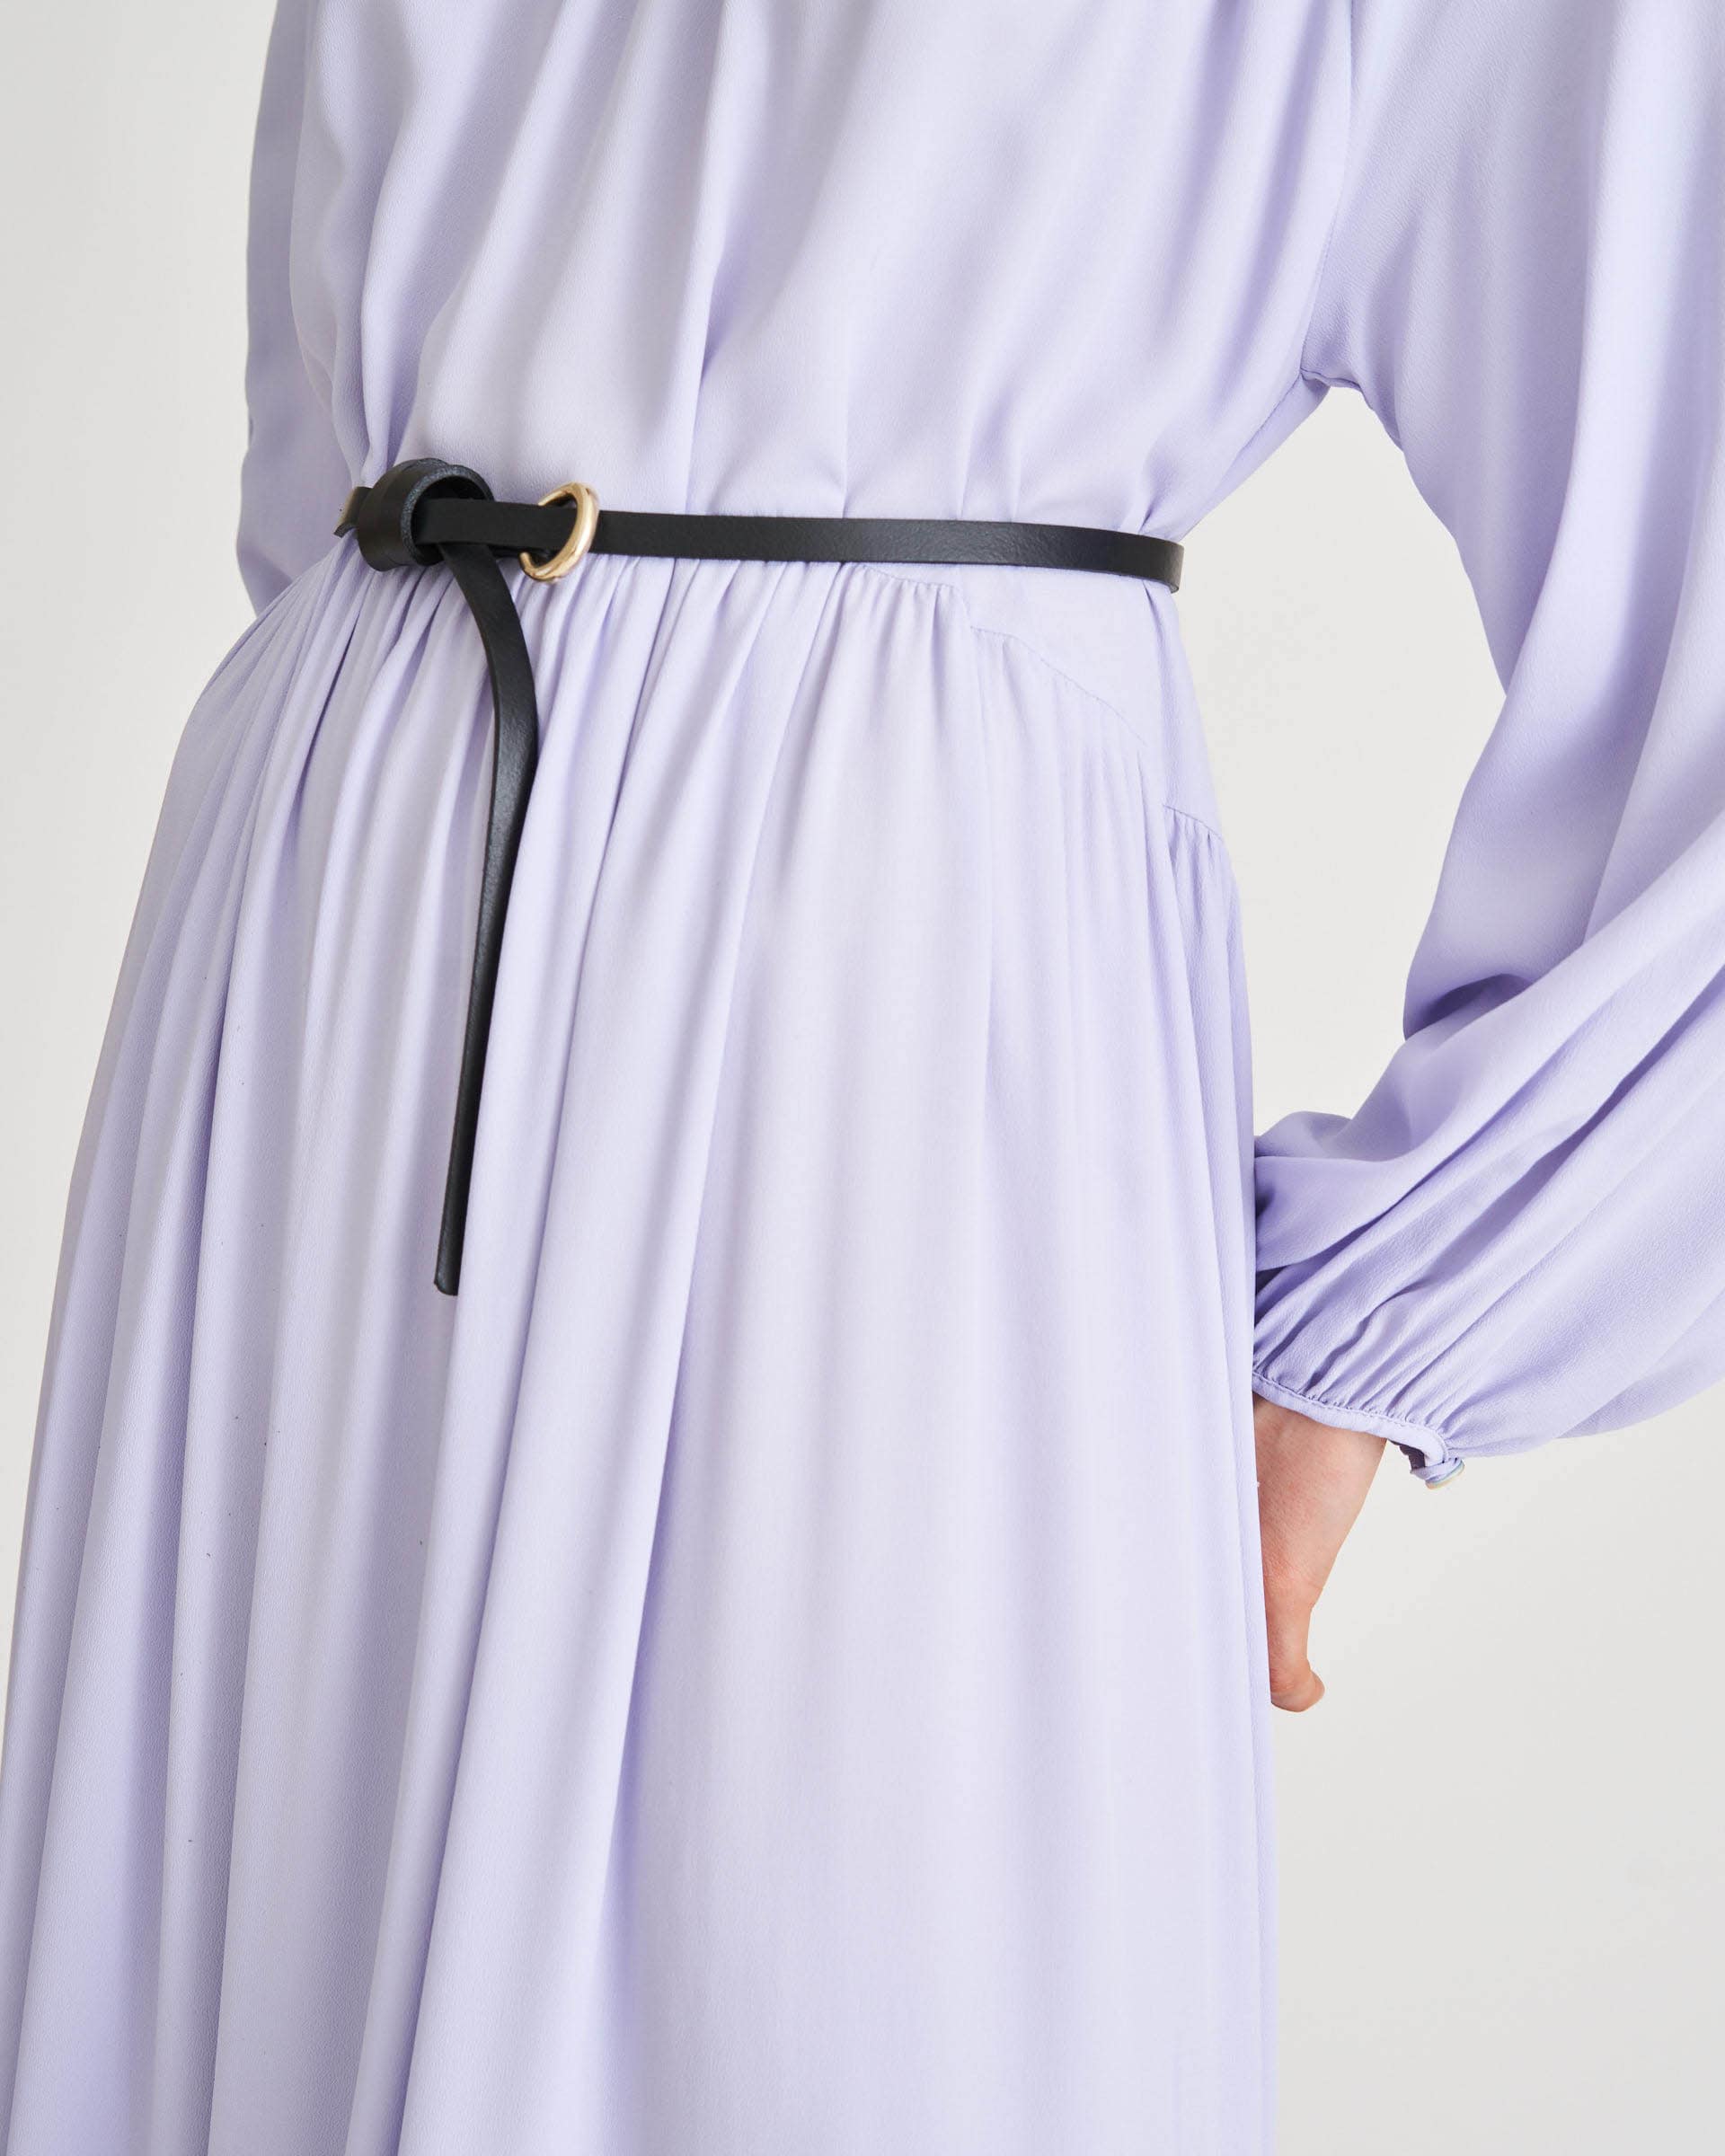 The Market Store | Thin Belt With Knot Motif On The Front